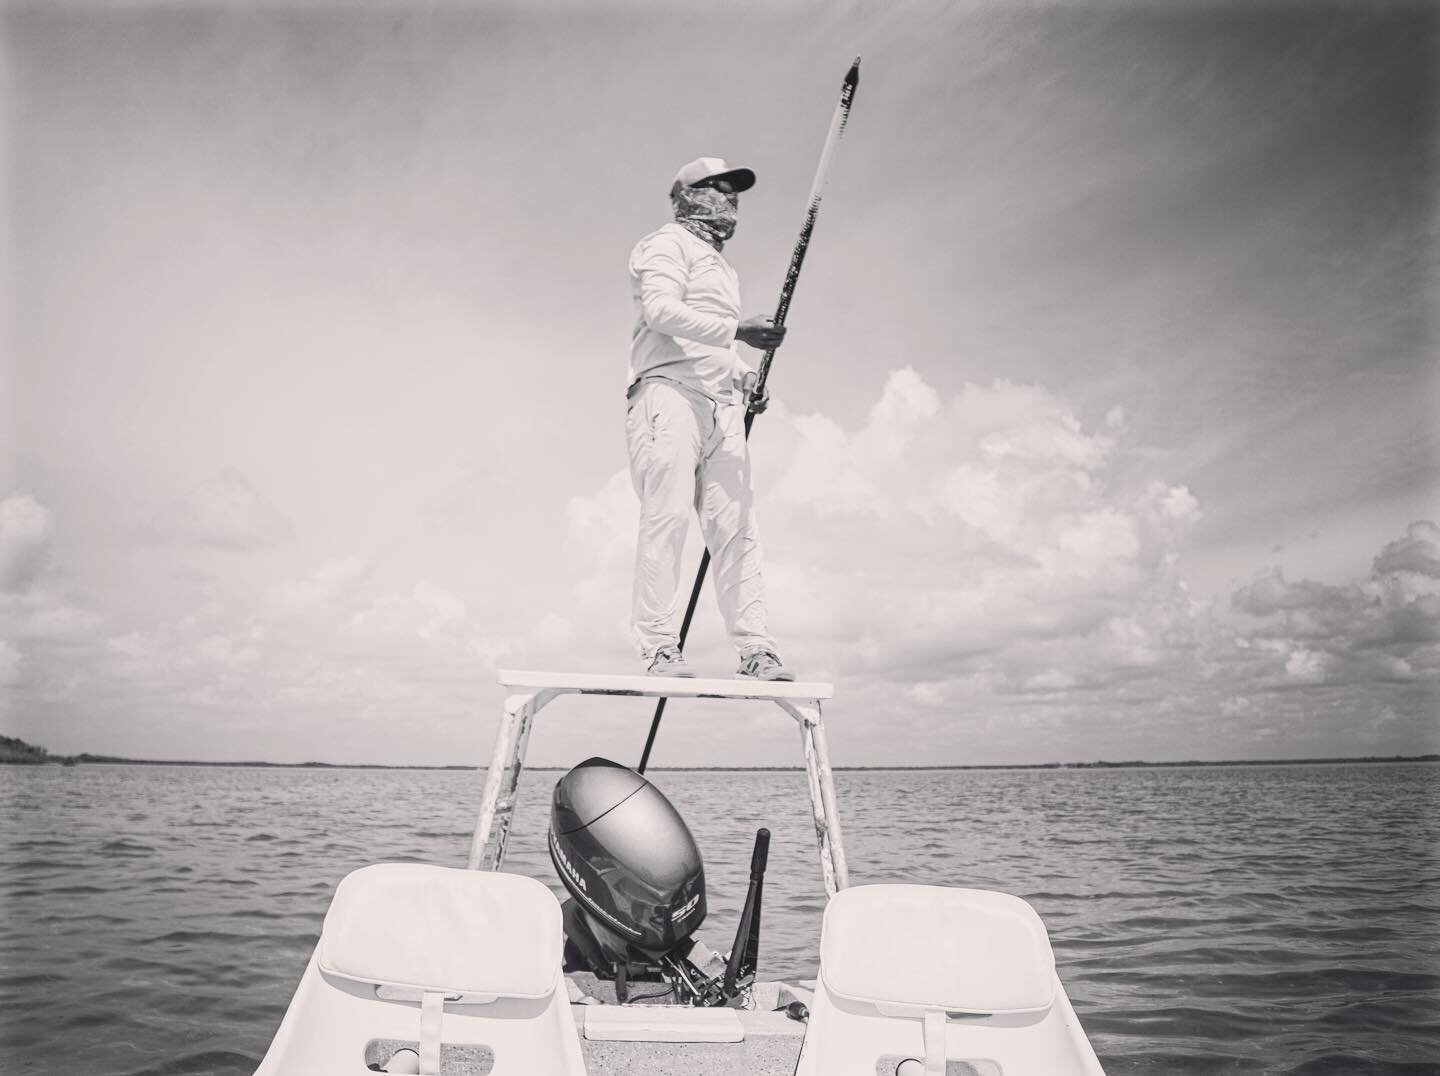 @centurionjhonatan an ascension bay fishing guide. Hard working, extremely passionate and most importantly has eyes better than an eagle!
#Permit #Bonefish #Tarpon #Guide